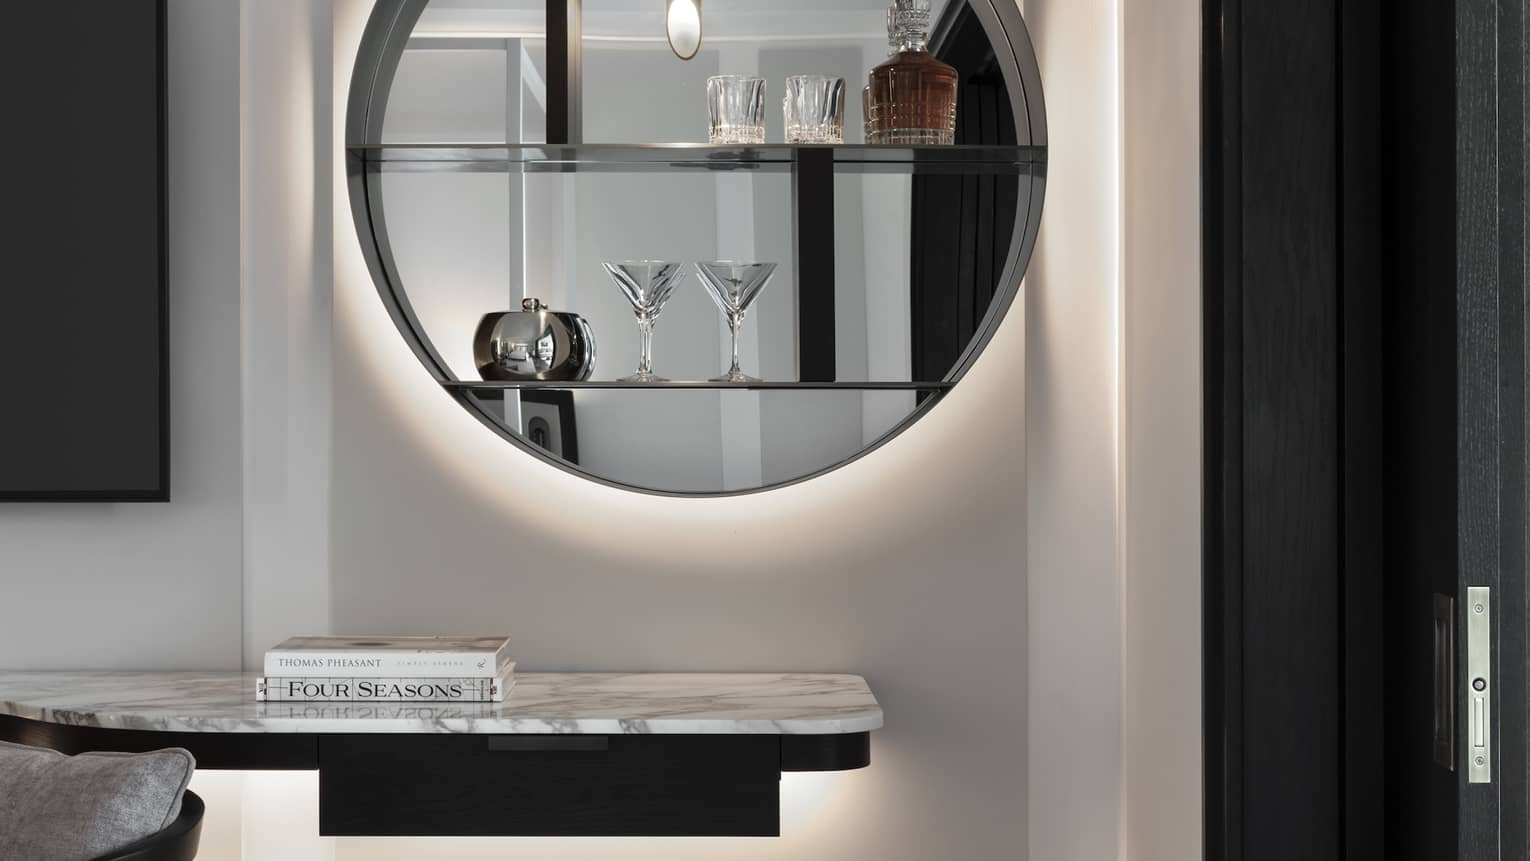 In-room bar with round modern mirror and cocktail glasses on shelves